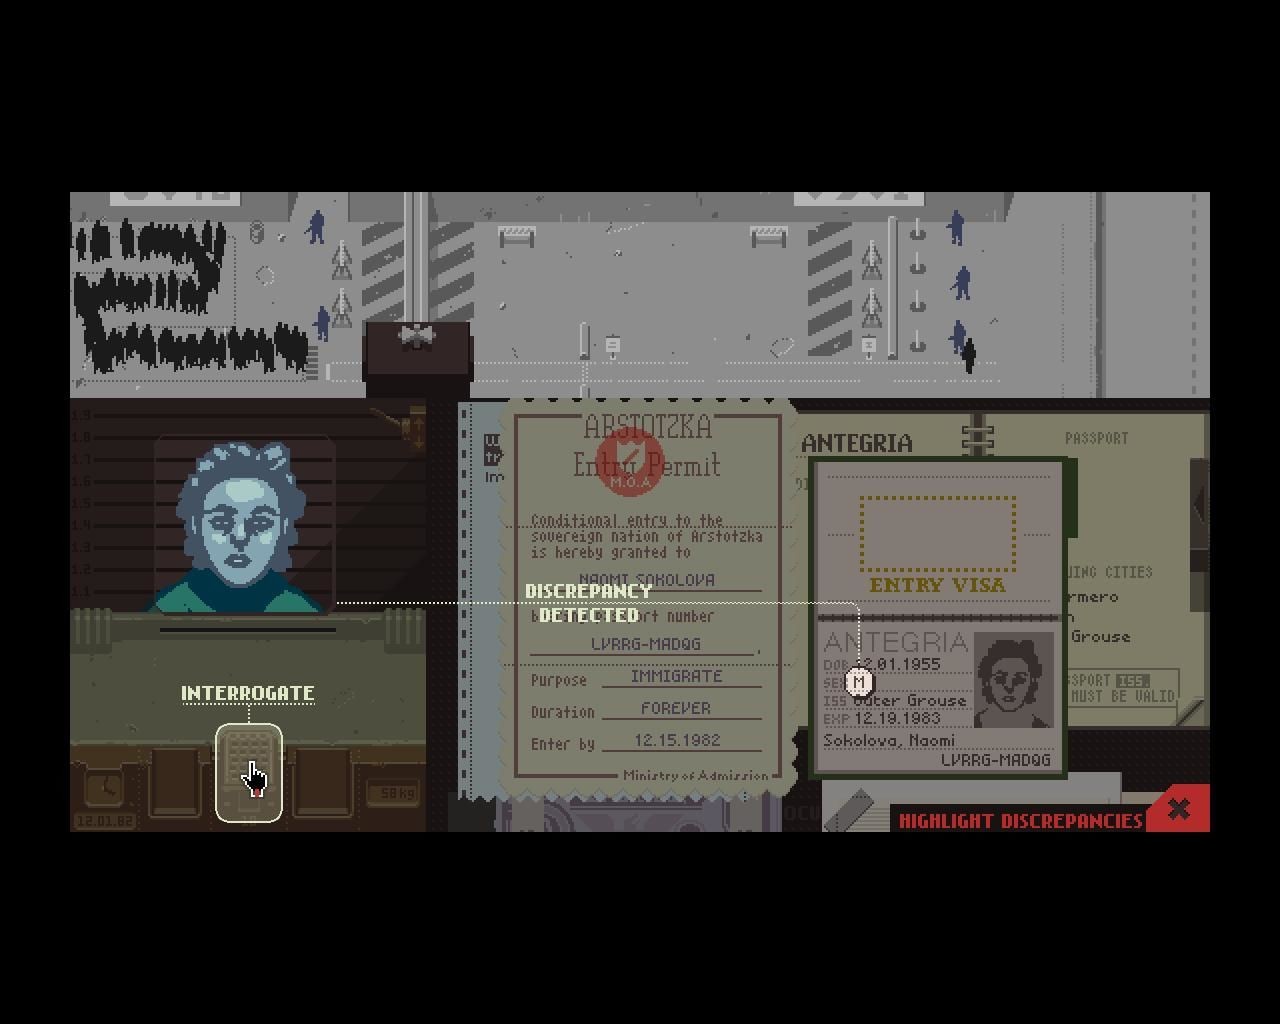 Please town. Антегрия papers please. Papers please Скриншоты. Карта papers please.